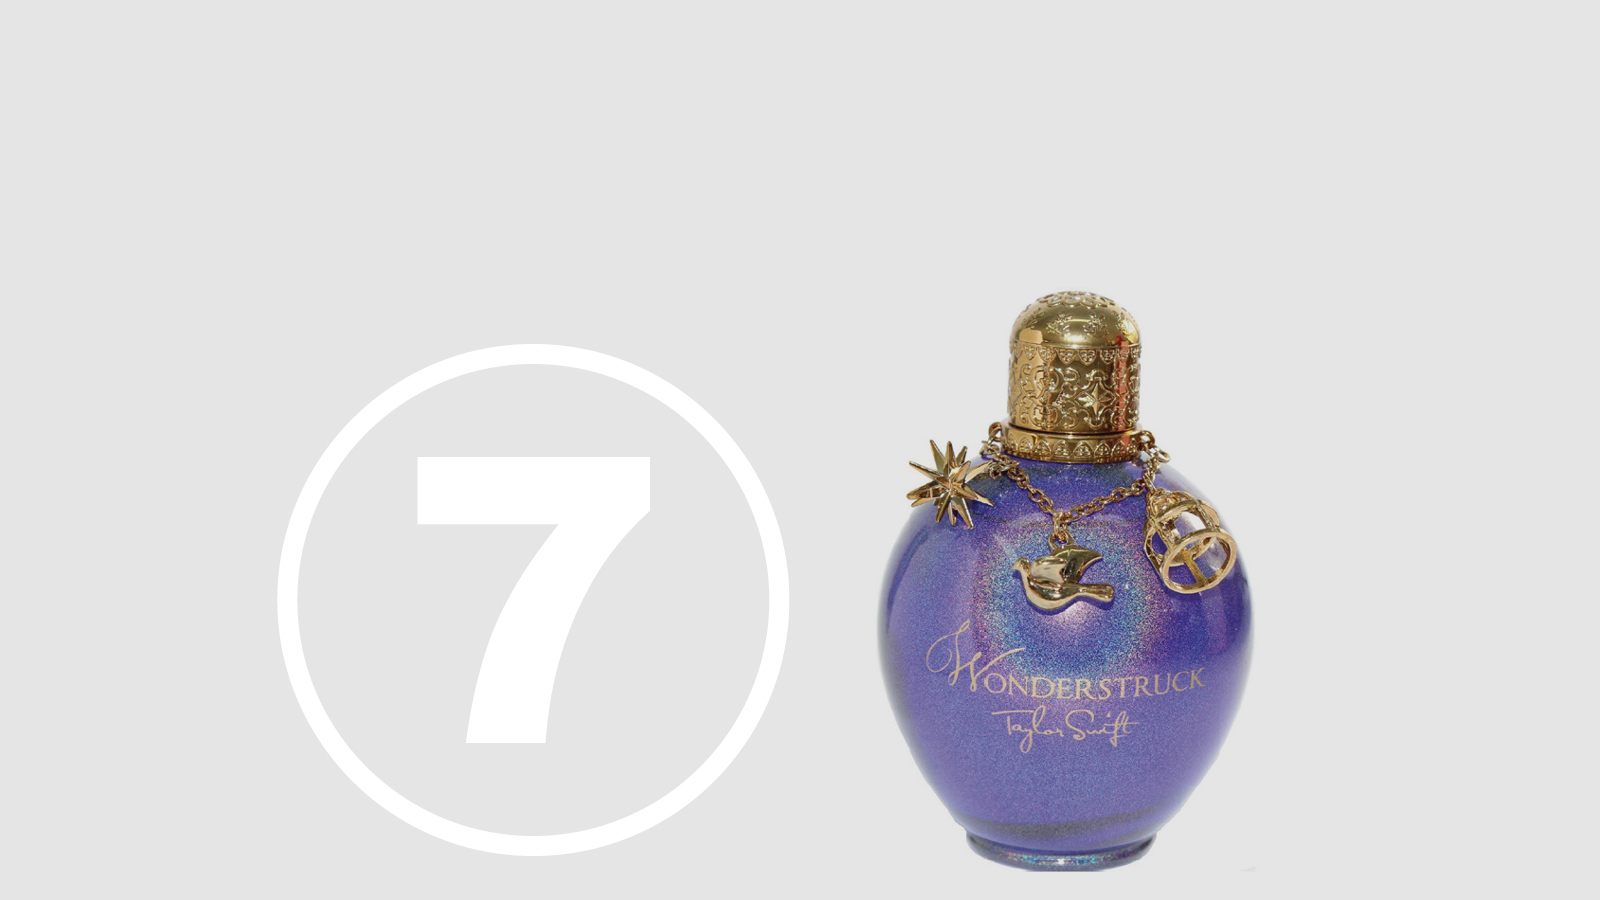 <h5>Top Ten Most Hazardous Products</h5><h4>Taylor Swift Wonderstruck Perfume</h4><p>A Revlon fine fragrance endorsed by the beloved pop country singer Taylor Swift.<br />We found <span class=